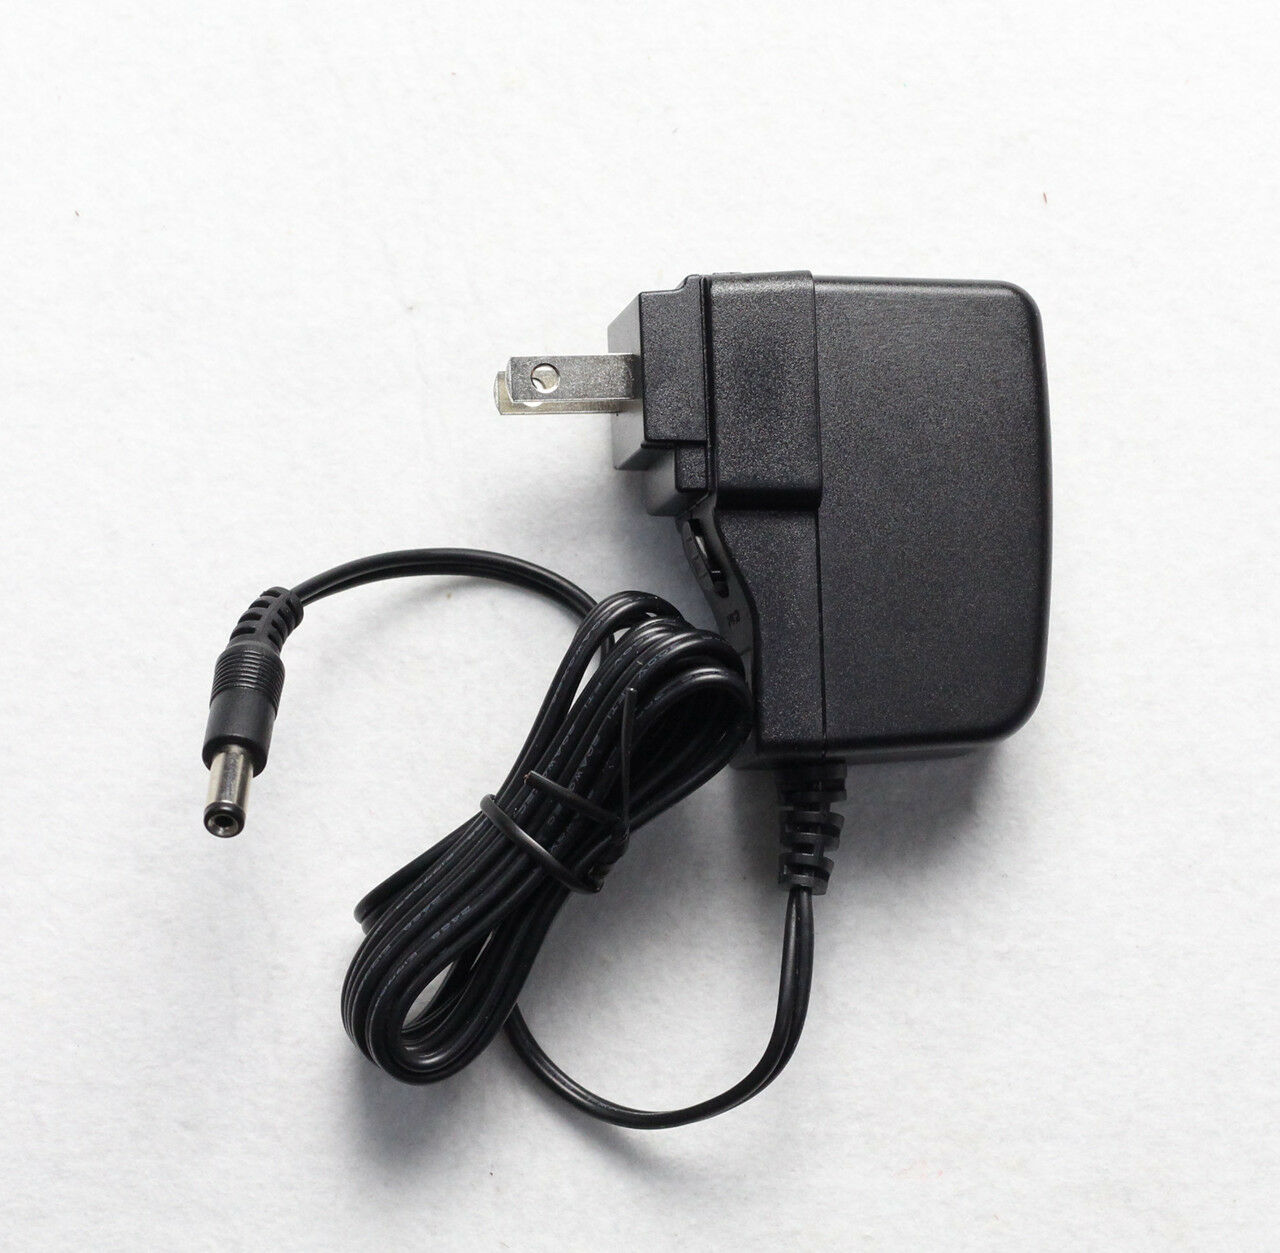 Switching Power Supply AC Adapter JBL SSA-18W-12 US 120150 12V-1.5A UPC: Does not apply Model: SSA-18W-12 US 120150